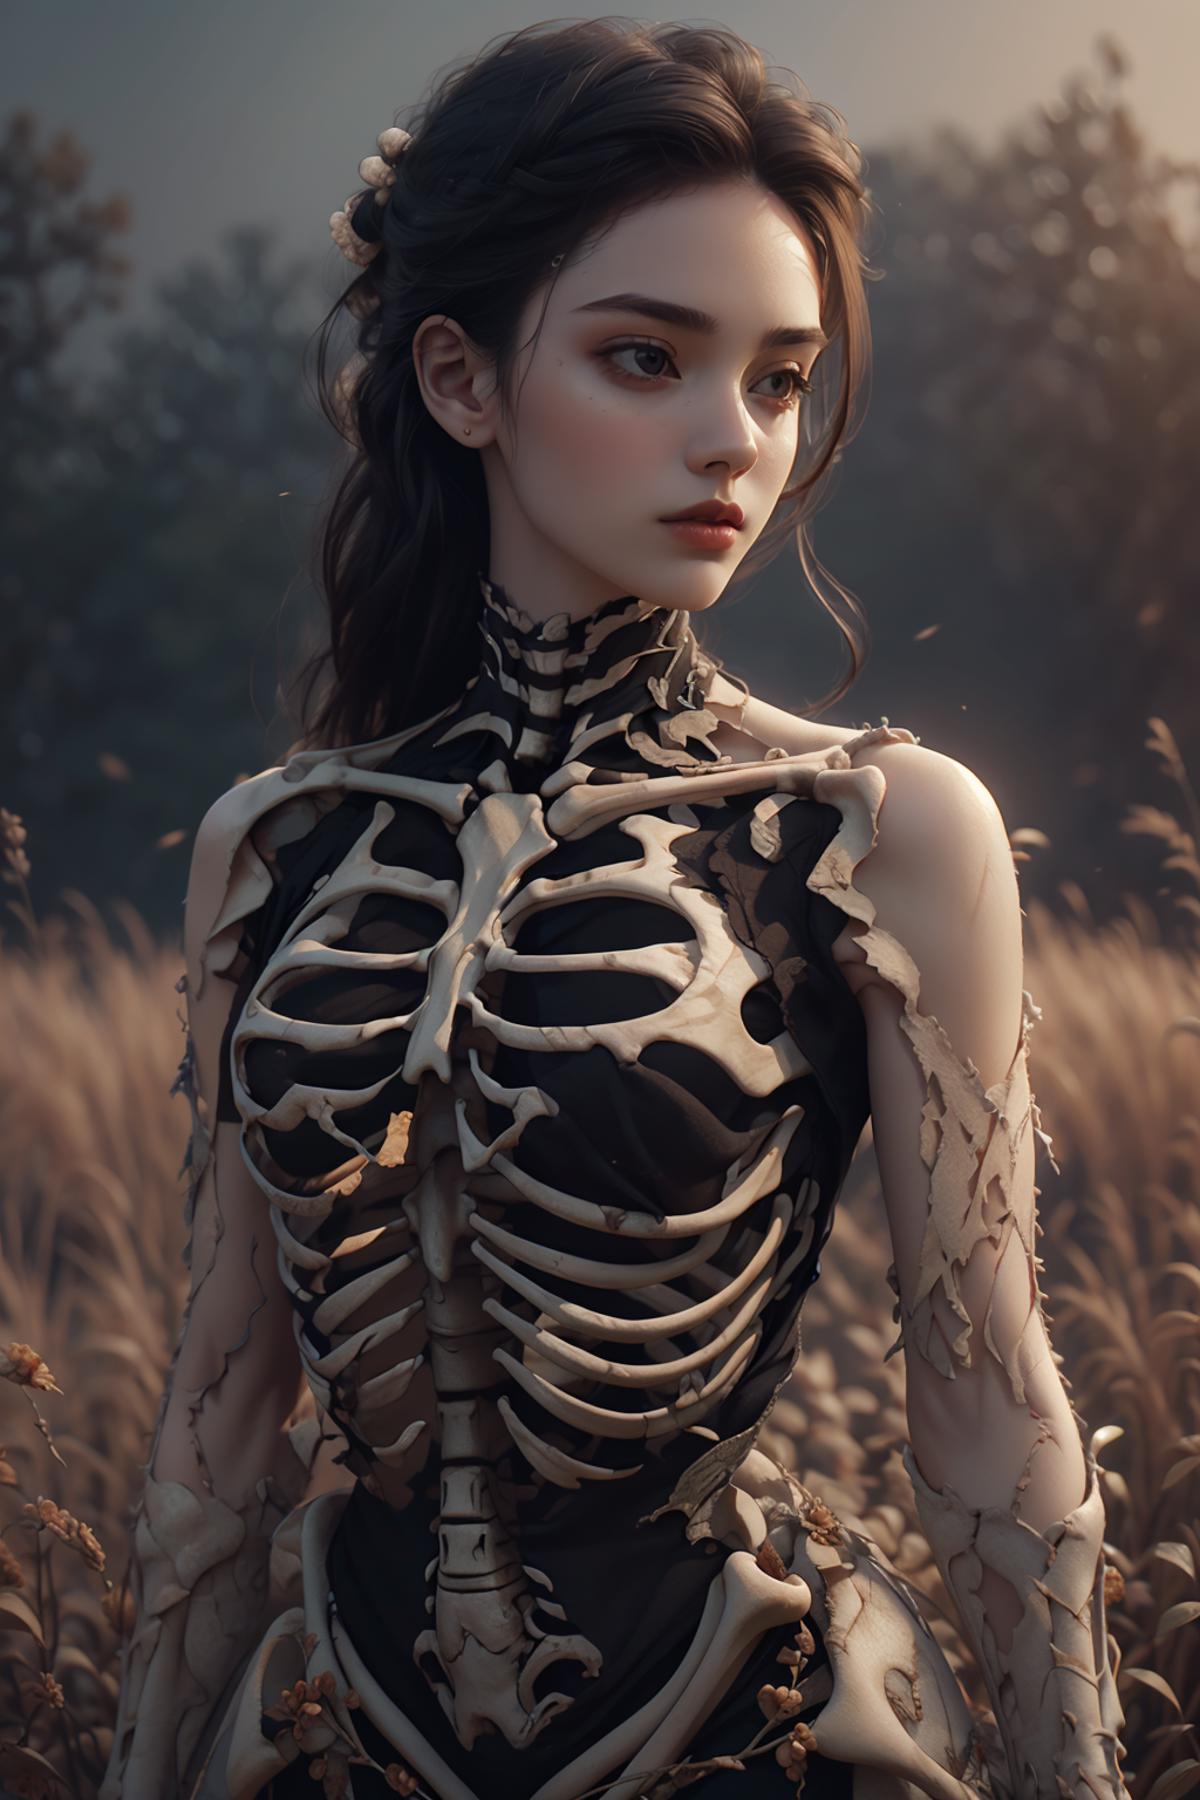 Beautiful Woman with Skeletal Ribs in a Field.